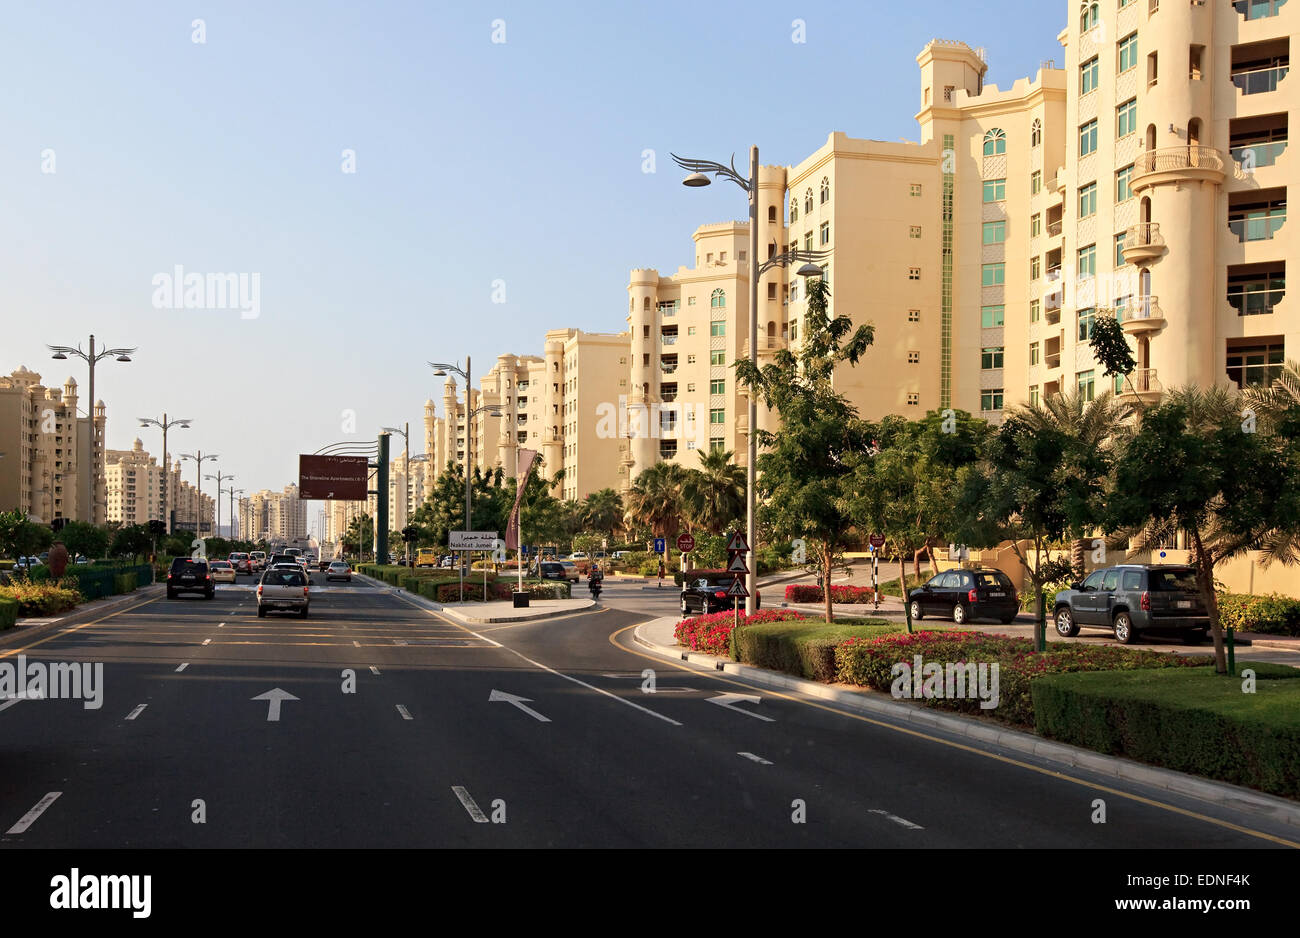 Architecture of an artificial island Palm Jumeirah. Stock Photo